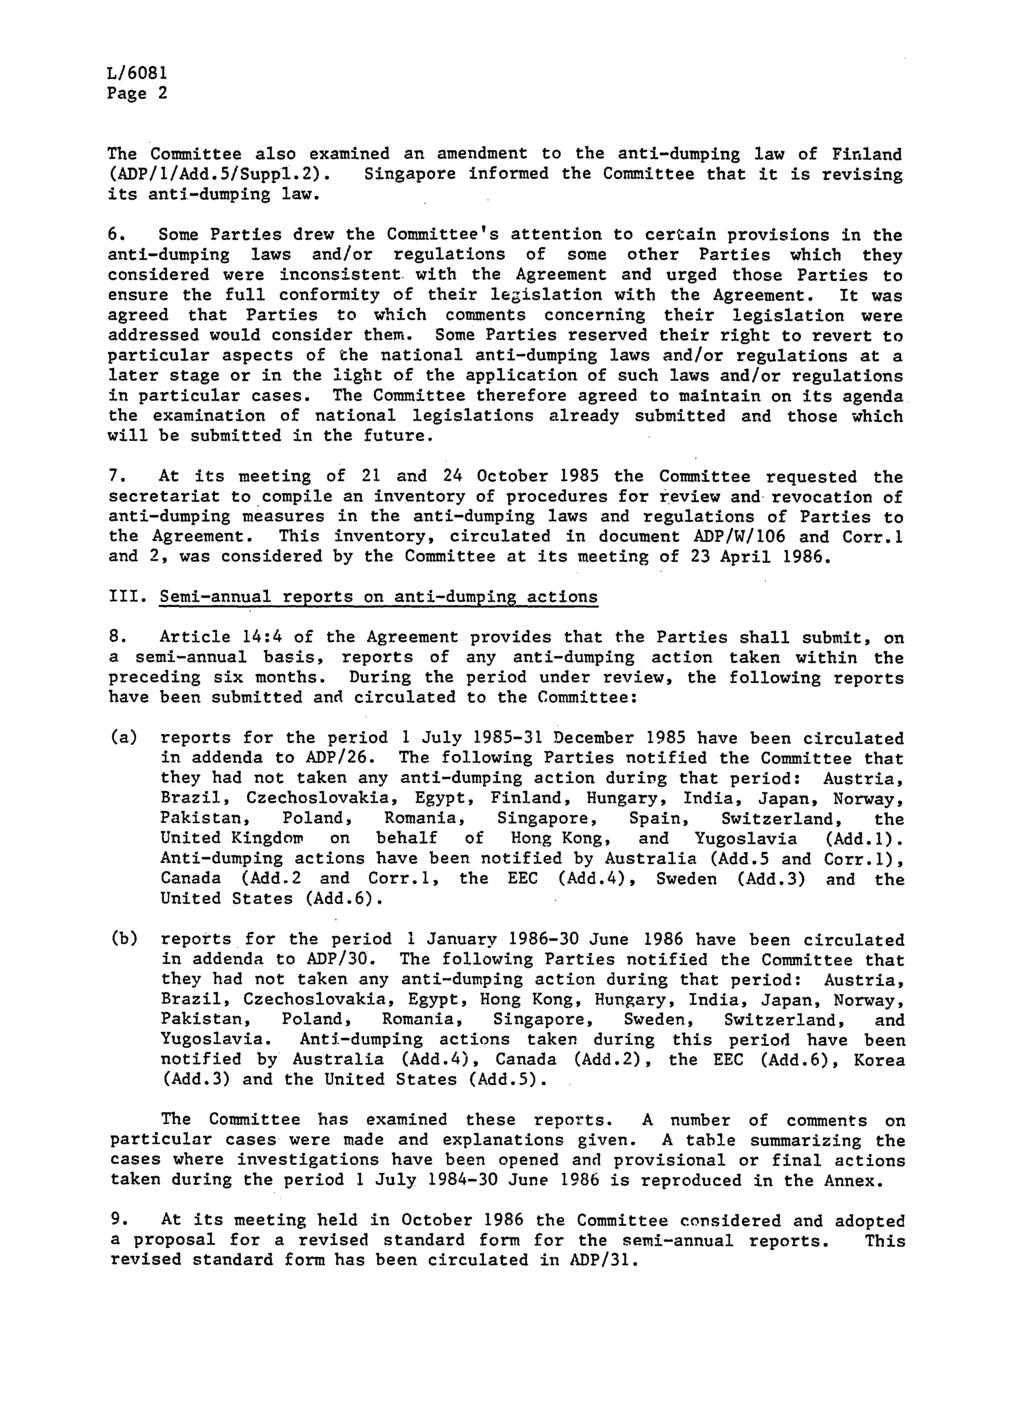 Page 2 The Committee also examined an amendment to the anti-dumping law of Finland (ADP/l/Add.5/Suppl.2). Singapore informed the Committee that it is revising its anti-dumping law. 6.